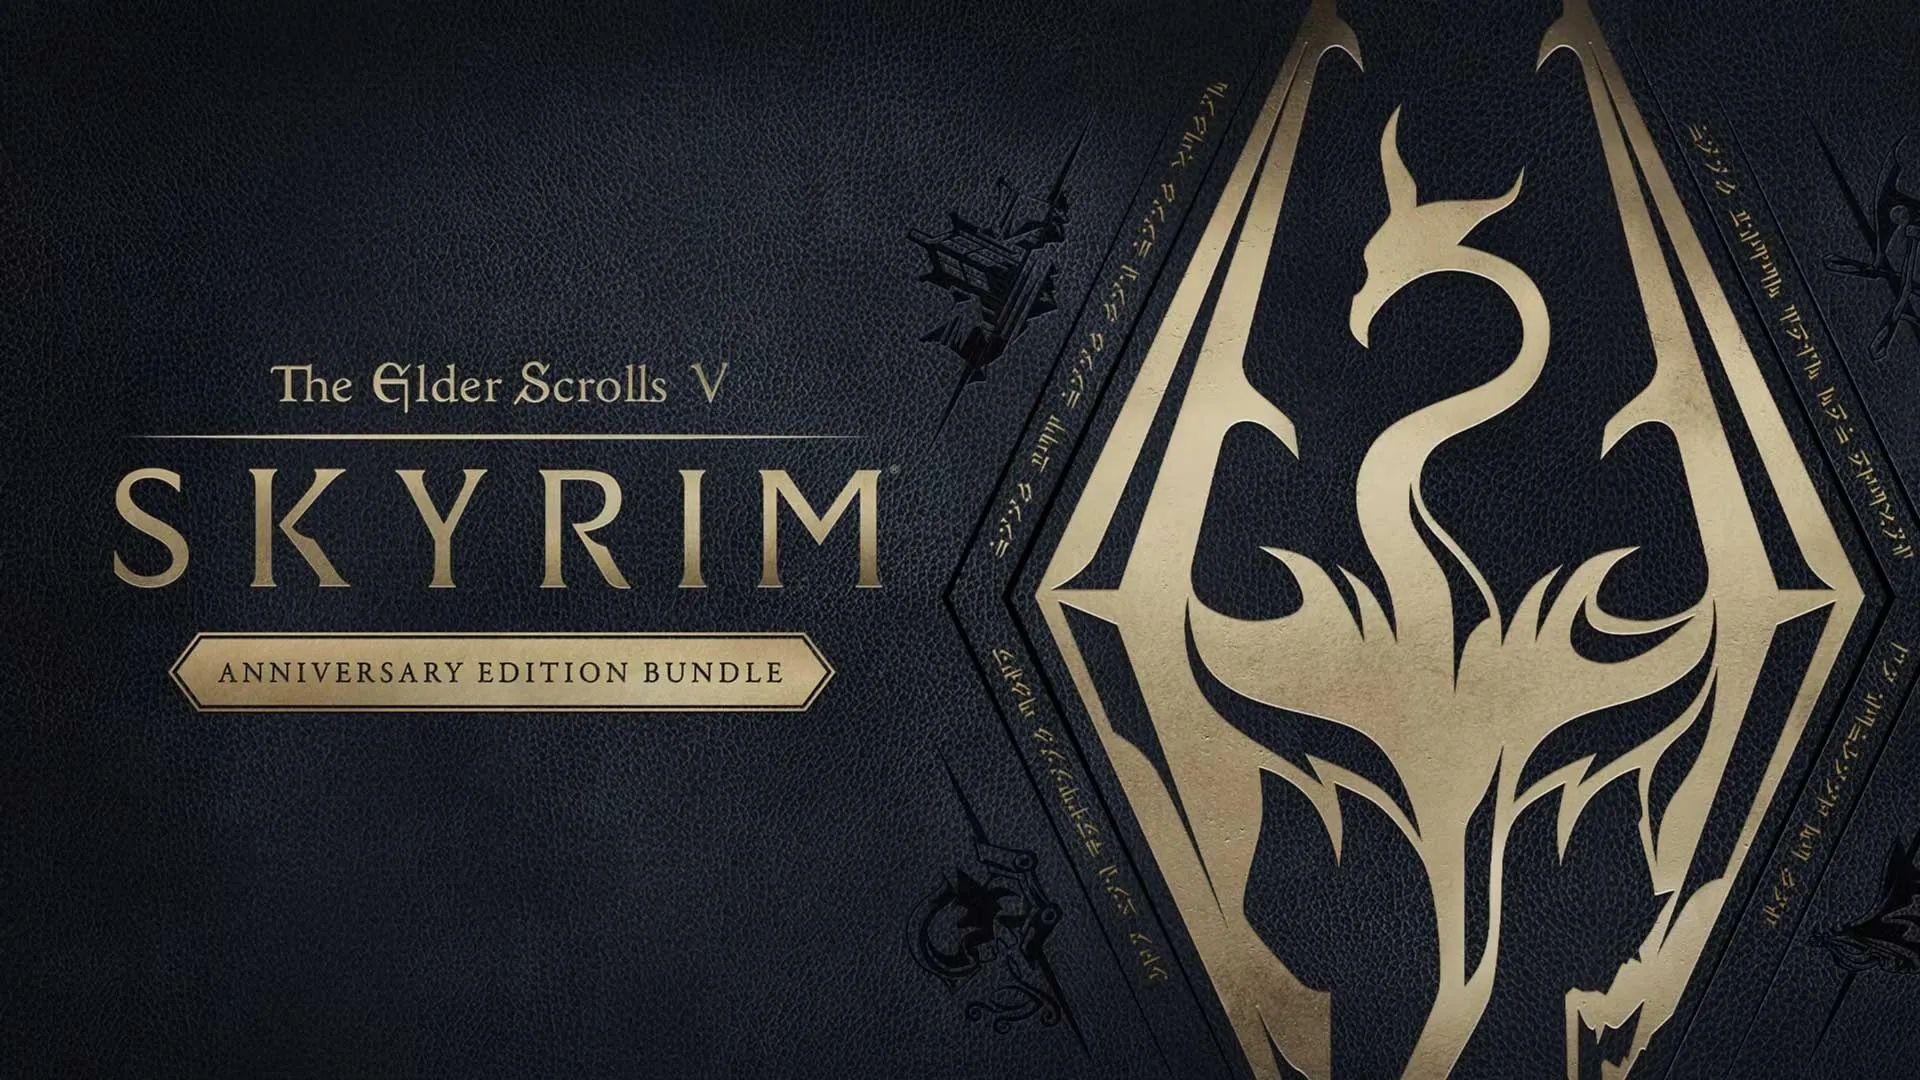 The Elder Scrolls V: Skyrim Anniversary Edition Bundle launches on Nintendo Switch for $70